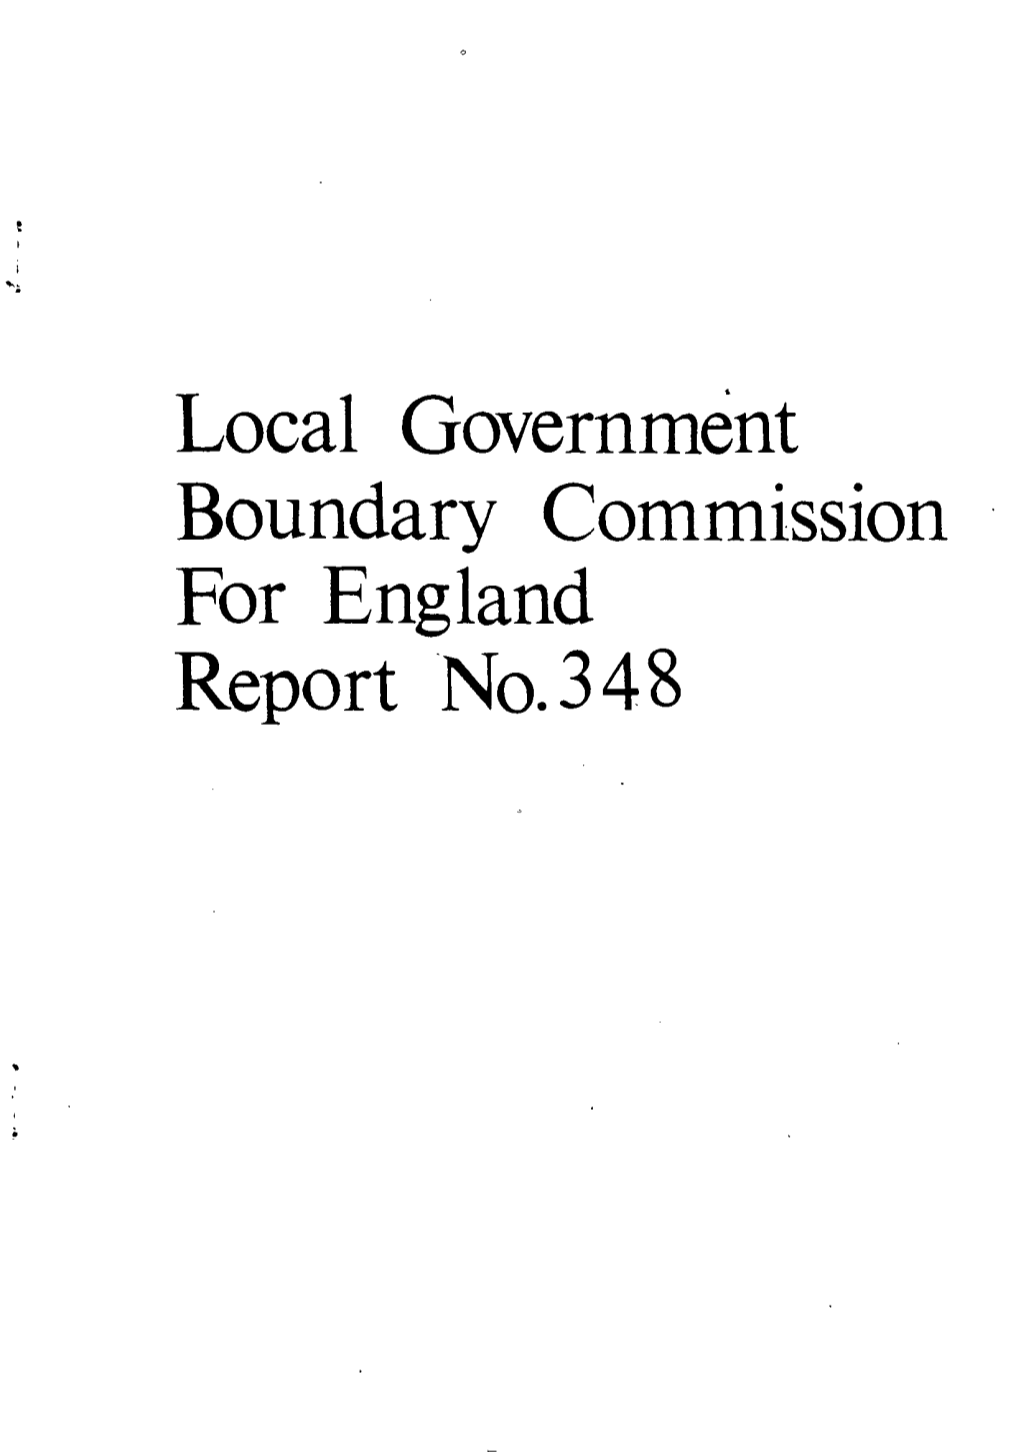 Local Government Boundary Commission for England Report No.348 LOCAL Coverumeilt BOUNDARY COMMISSION FOH S.'Glaild